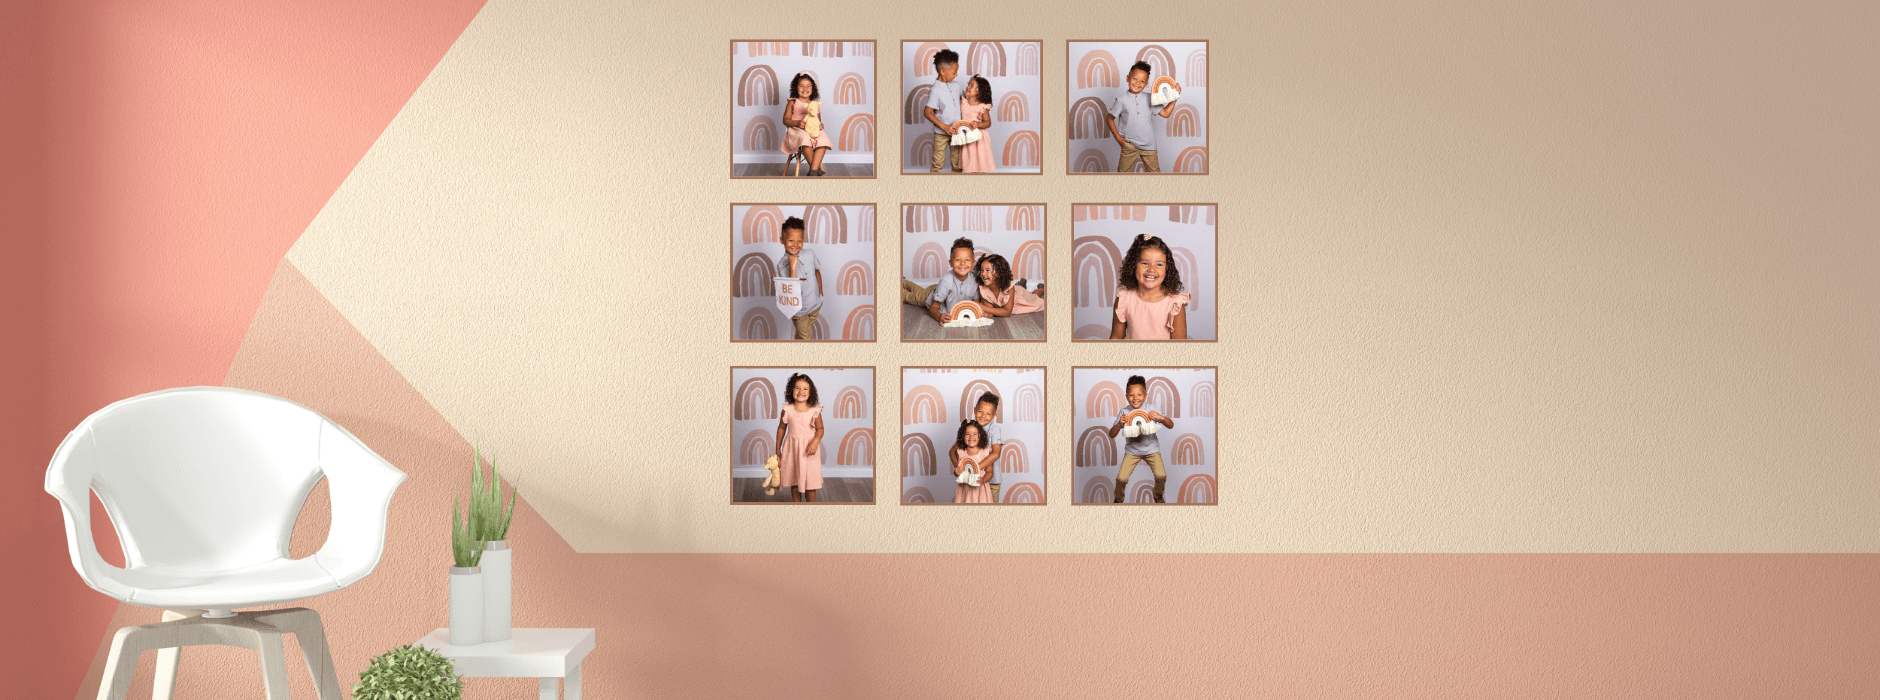 Gallery wall featuring a grid layout of family photography capture at JCPenney Portraits. 